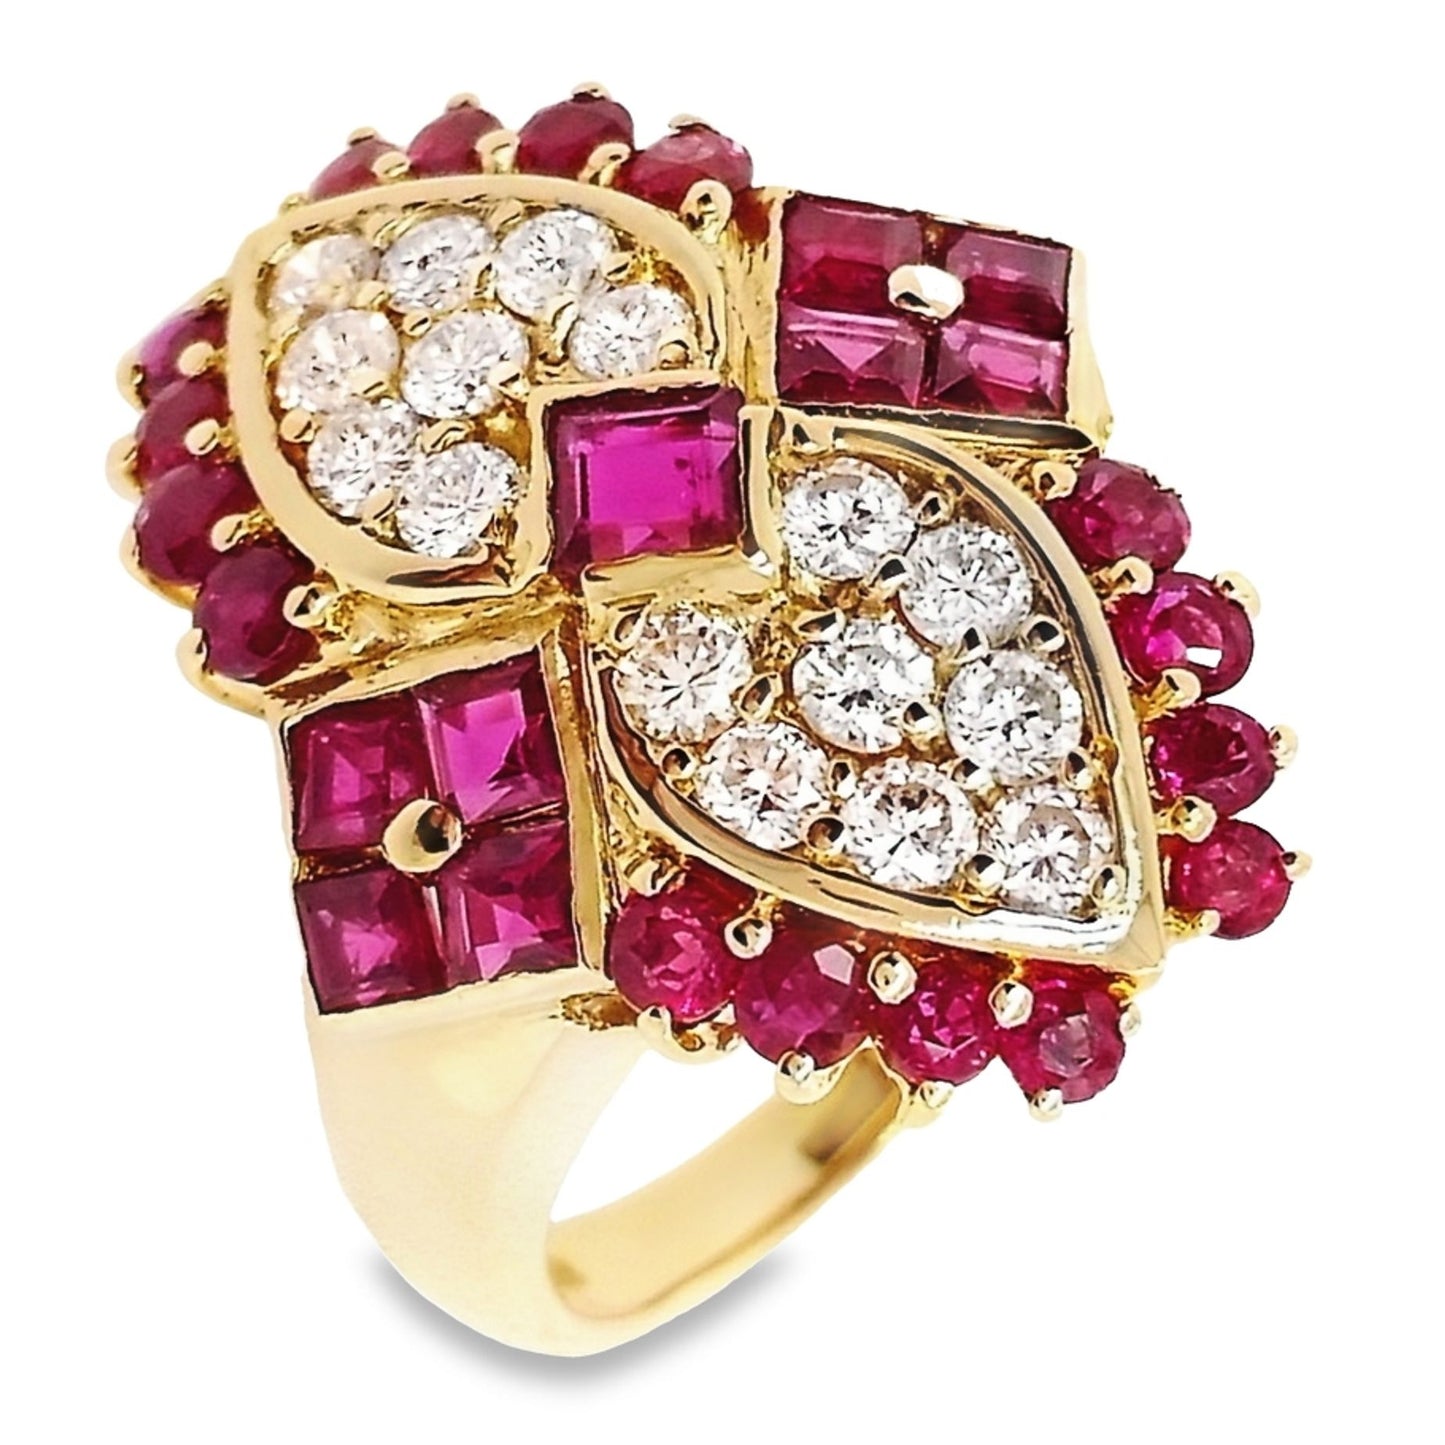 1.98ct NATURAL RUBIES and 0.65ct NATURAL DIAMONDS set with 18K Yellow Gold Ring